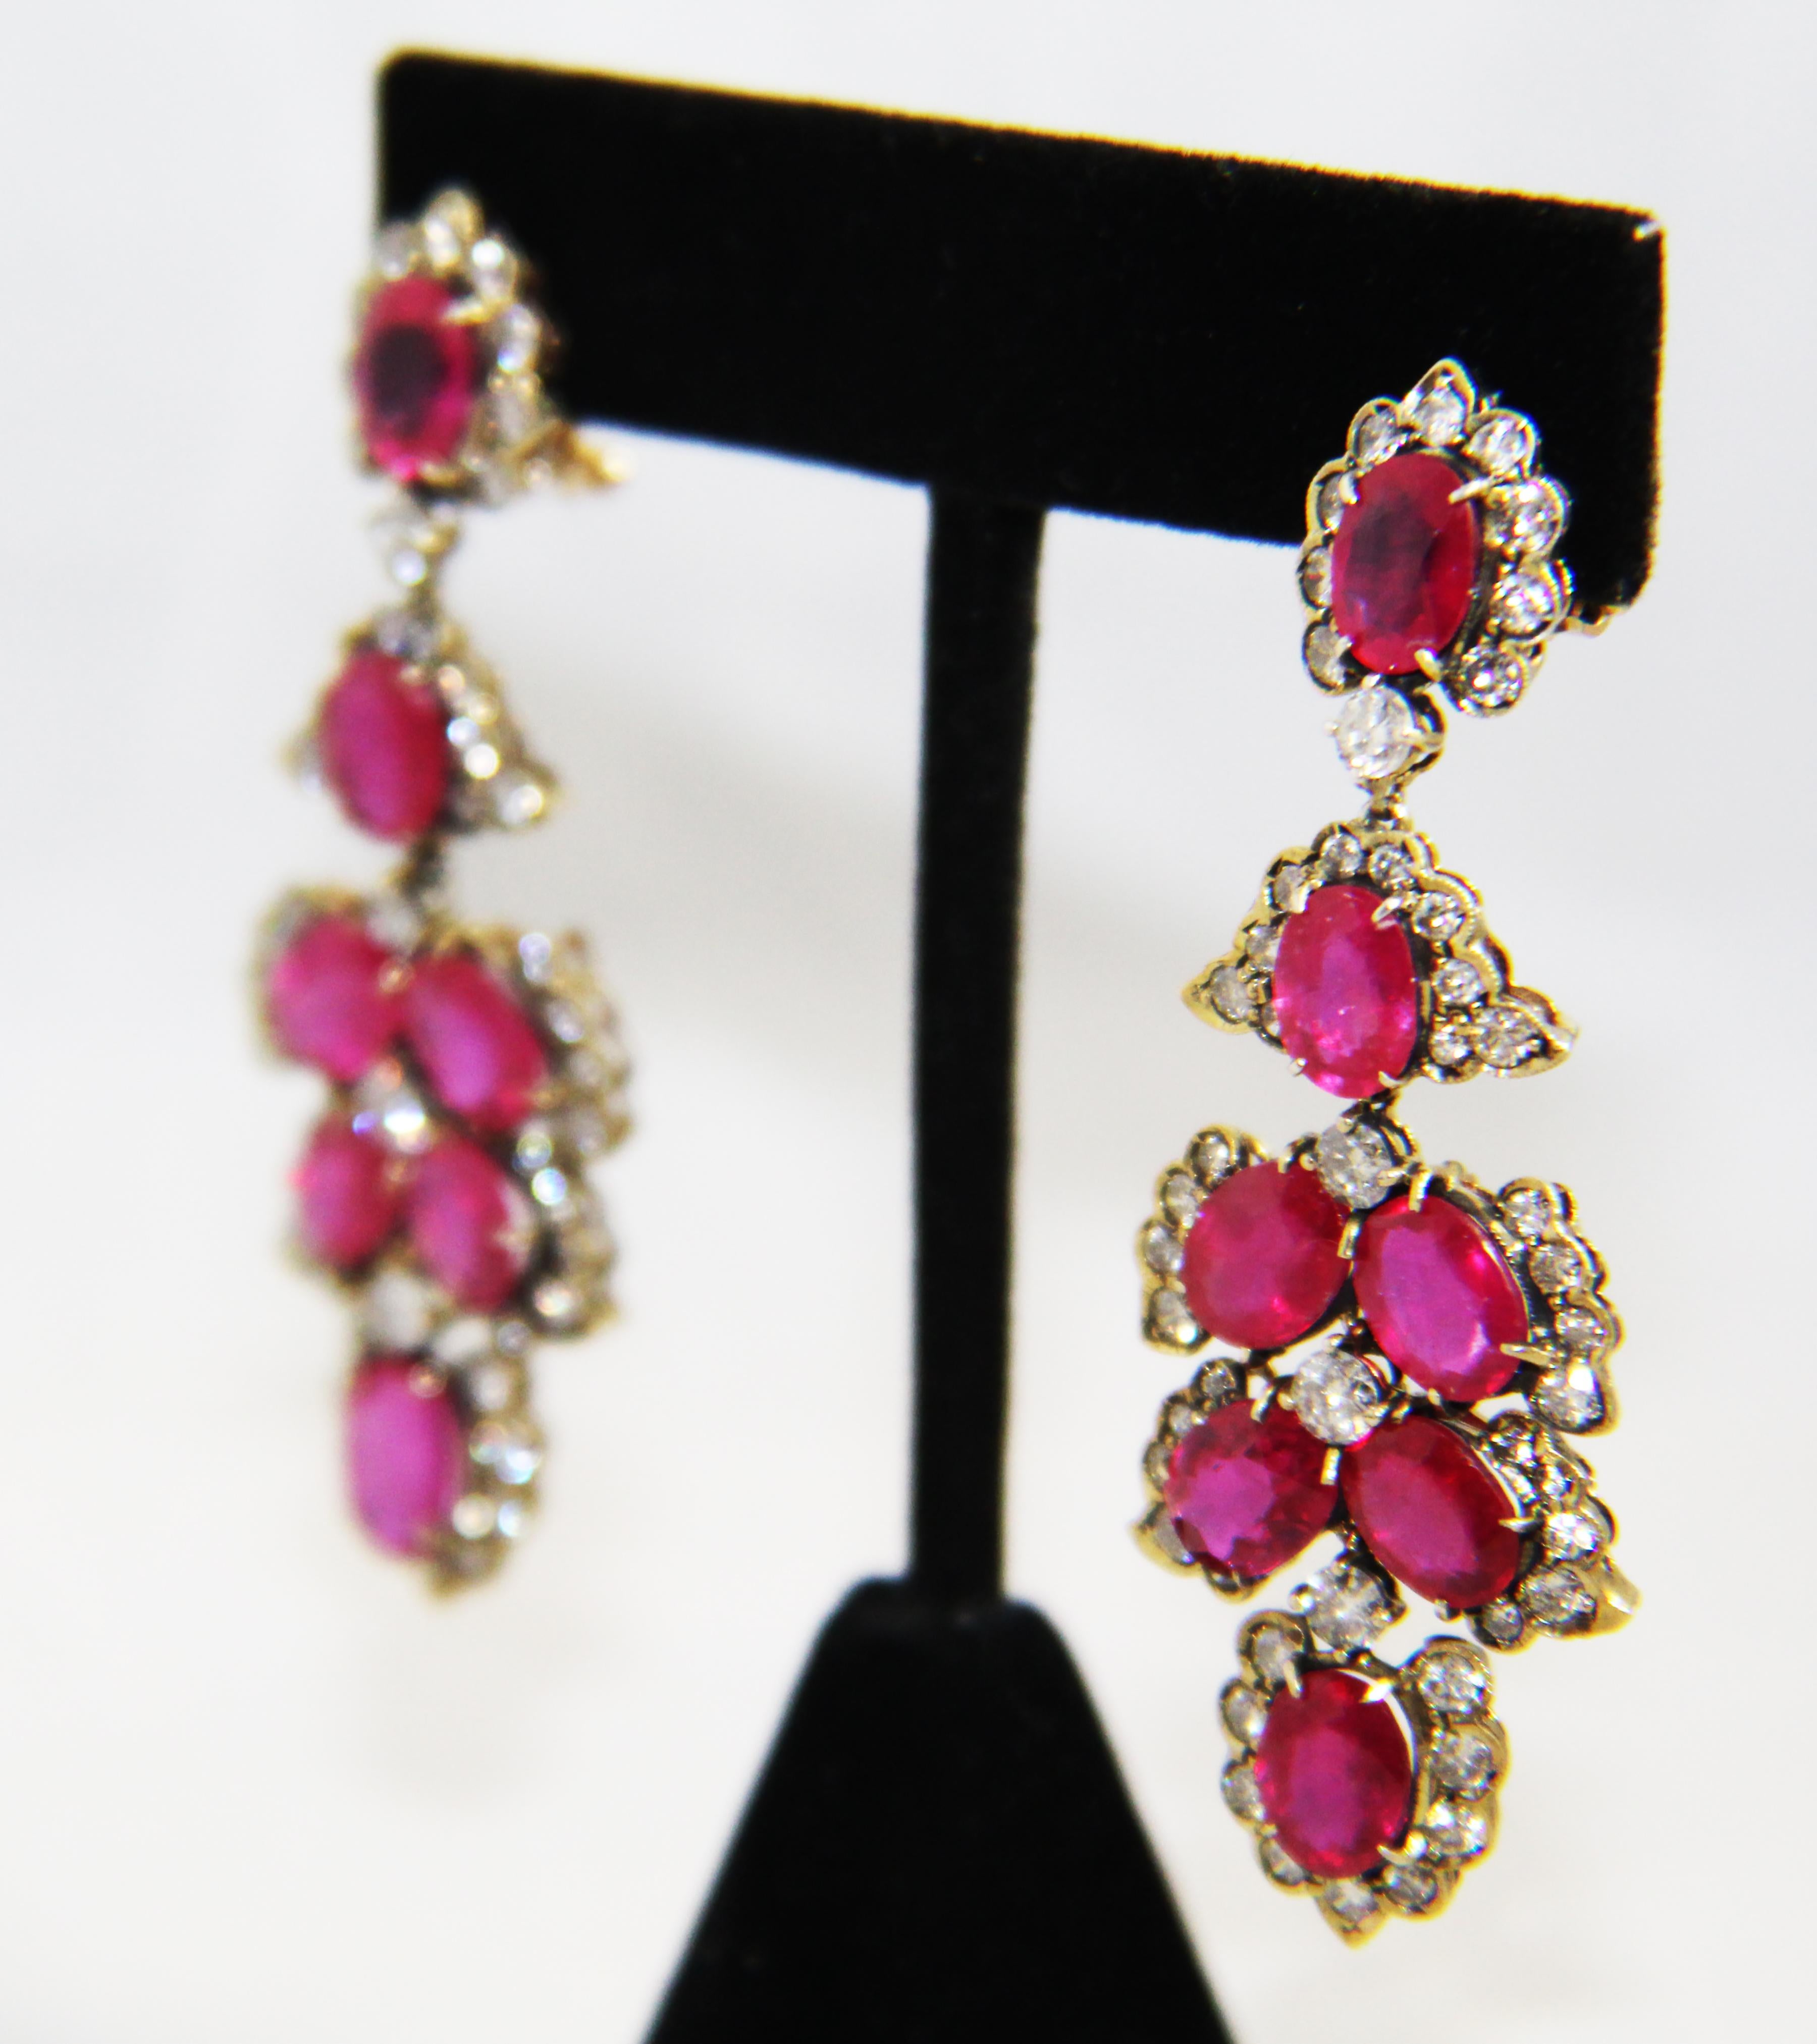 Fabricated in Italy, these stunning ruby and diamond earrings are unmistakably Luise! 14 karat yellow gold is the base that boasts 14 beautifully matched faceted oval red rubies with a combined total weight of 28.16 carats. Top level ruby is framed